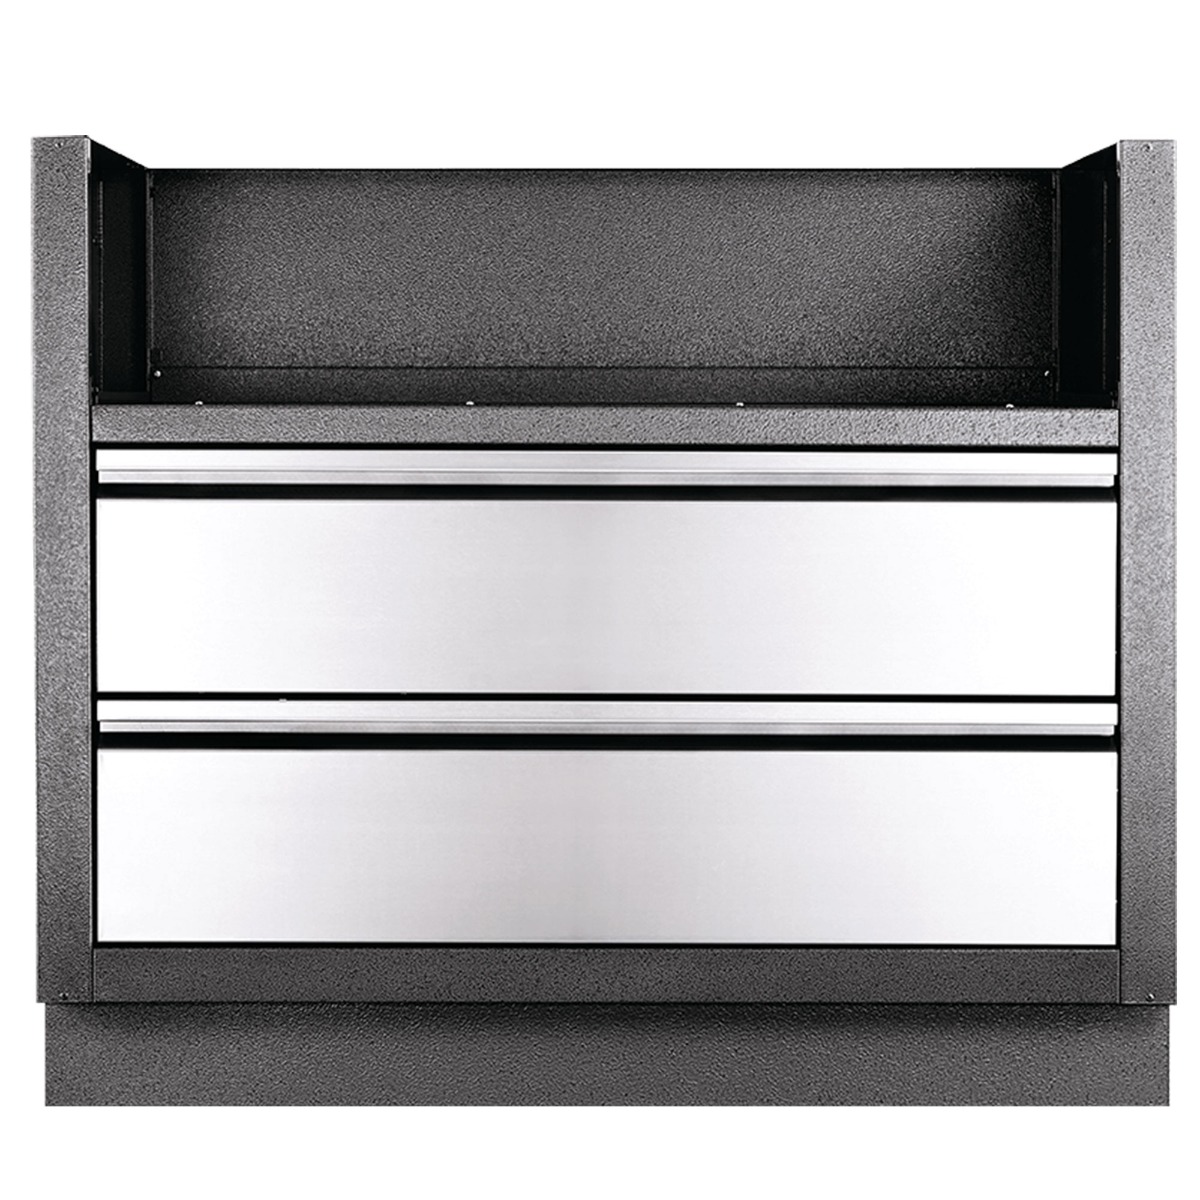 OASIS Under Grill Cabinet, for BIG38 – Napoleon®